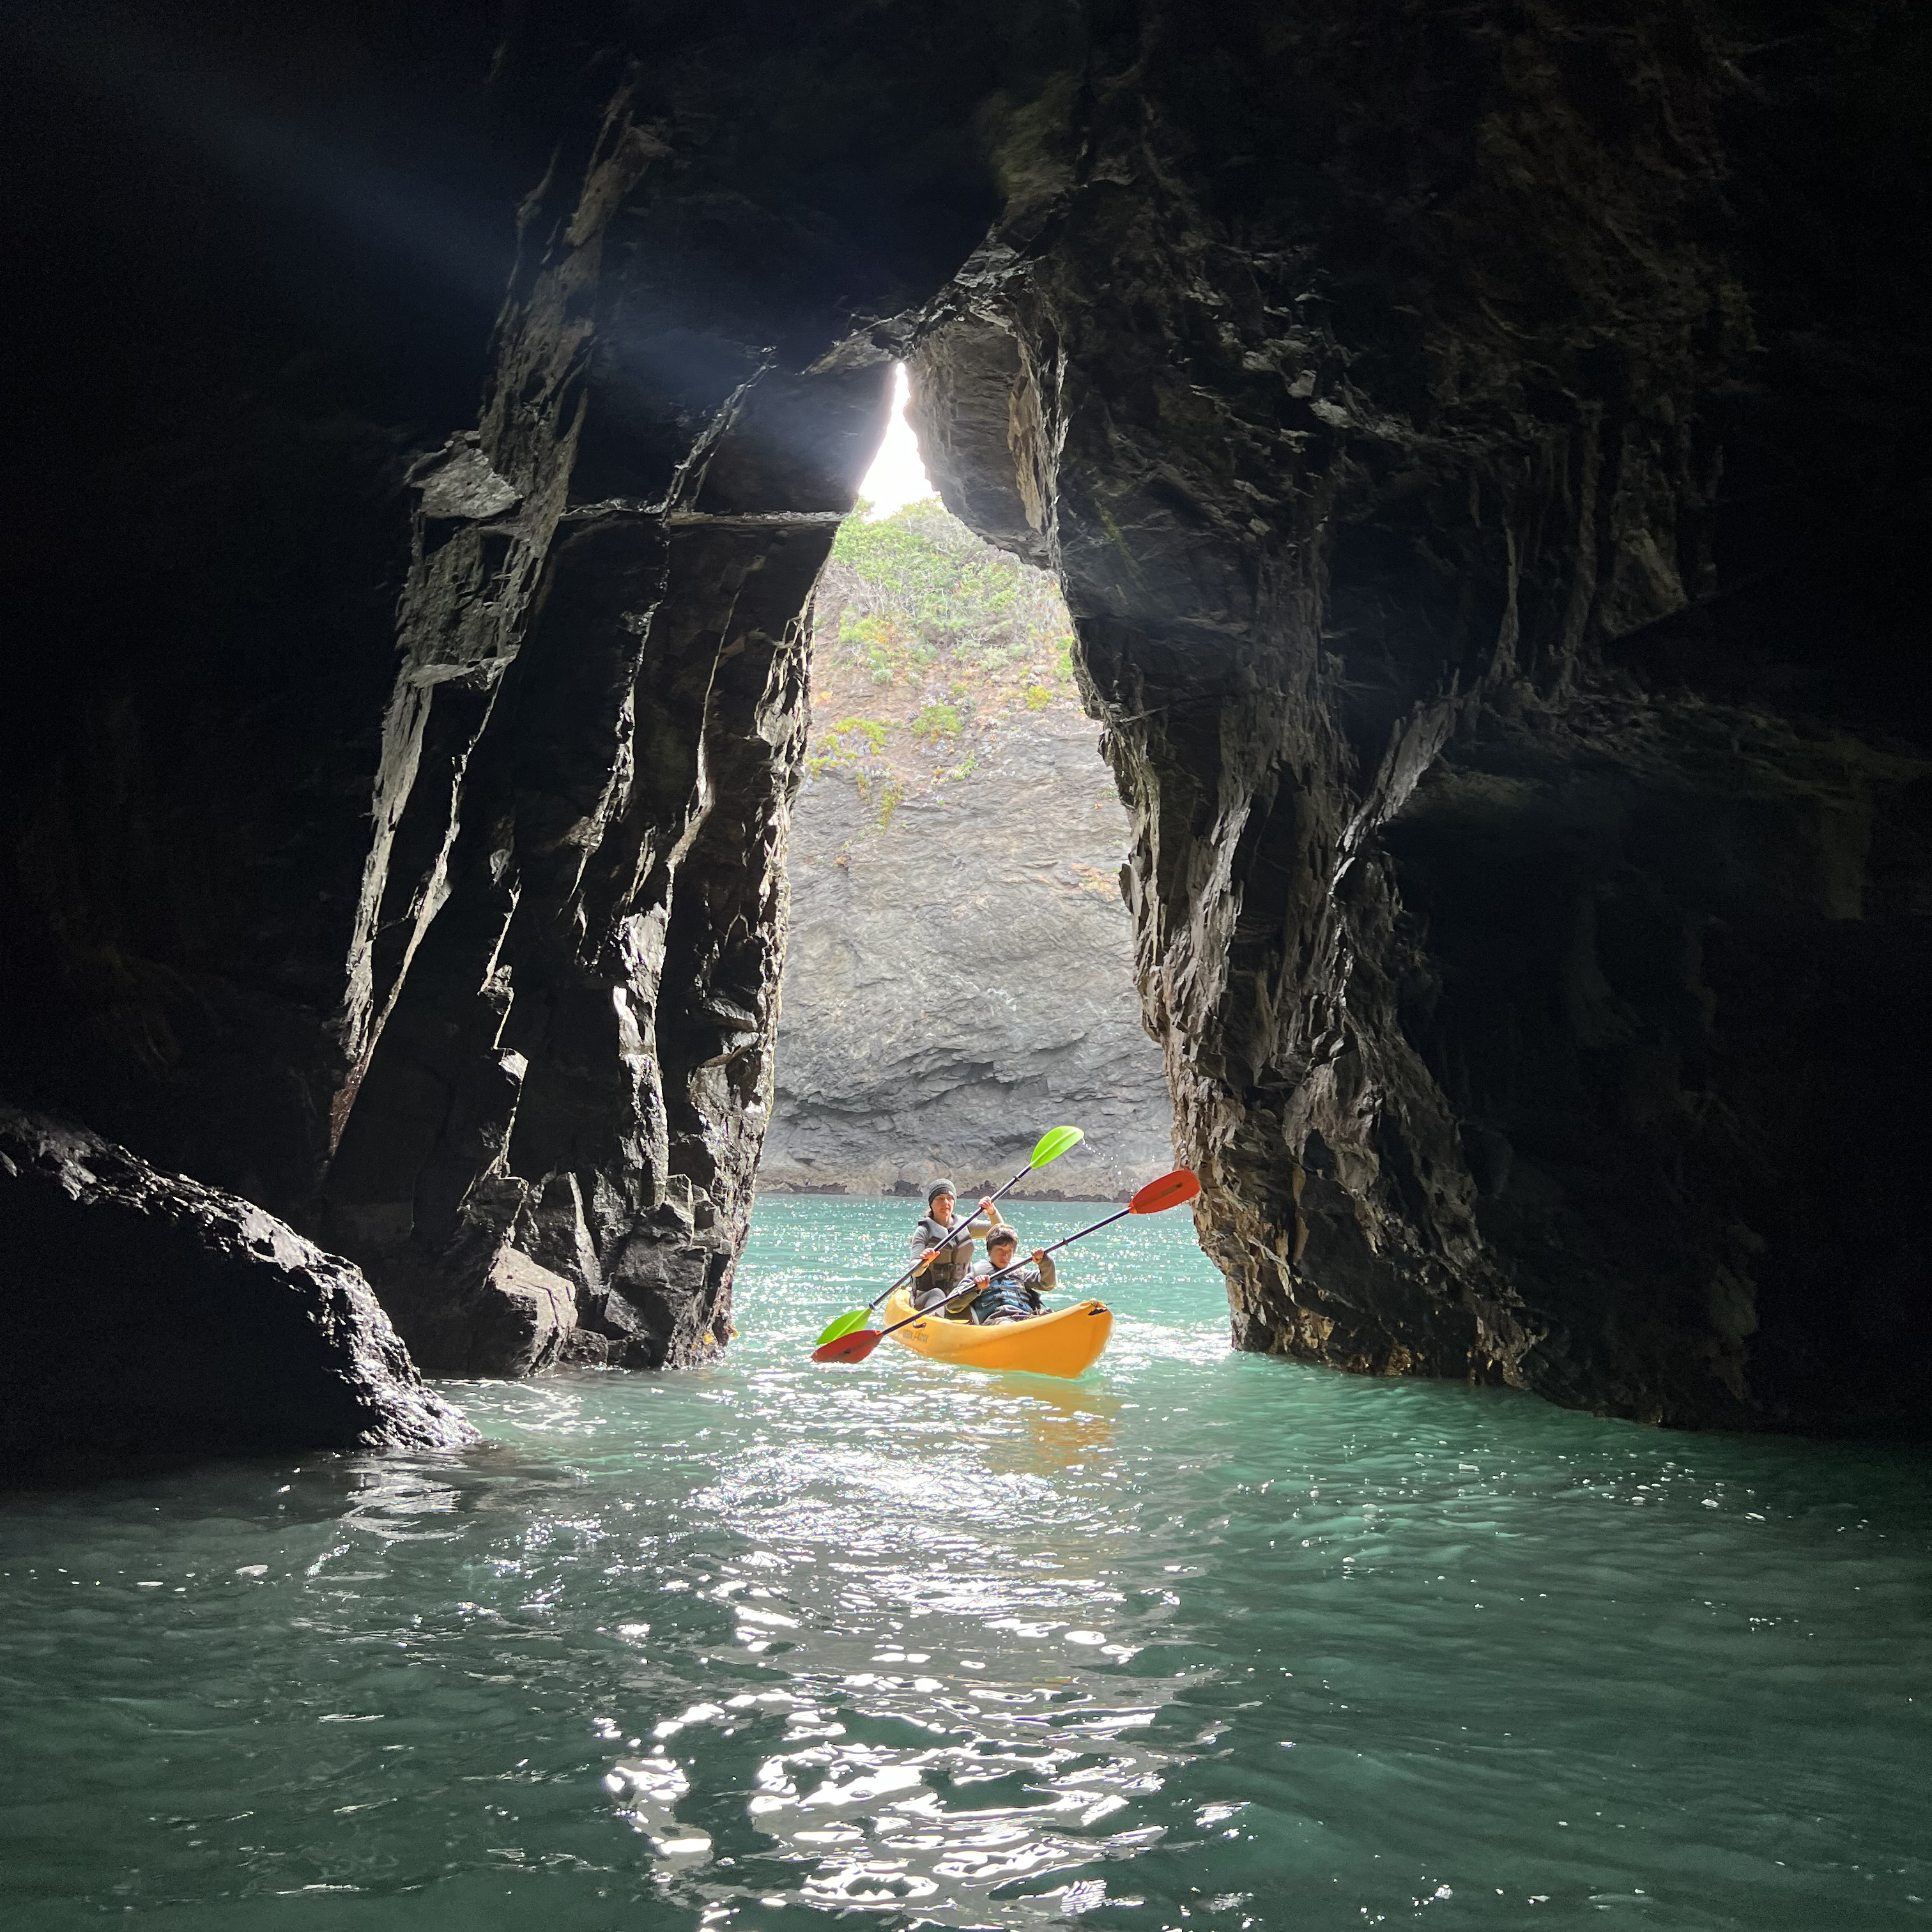 A kayak with two people paddles through the turquoise water inside a dark cave, heading toward a bright opening with rocky cliffs visible outside.